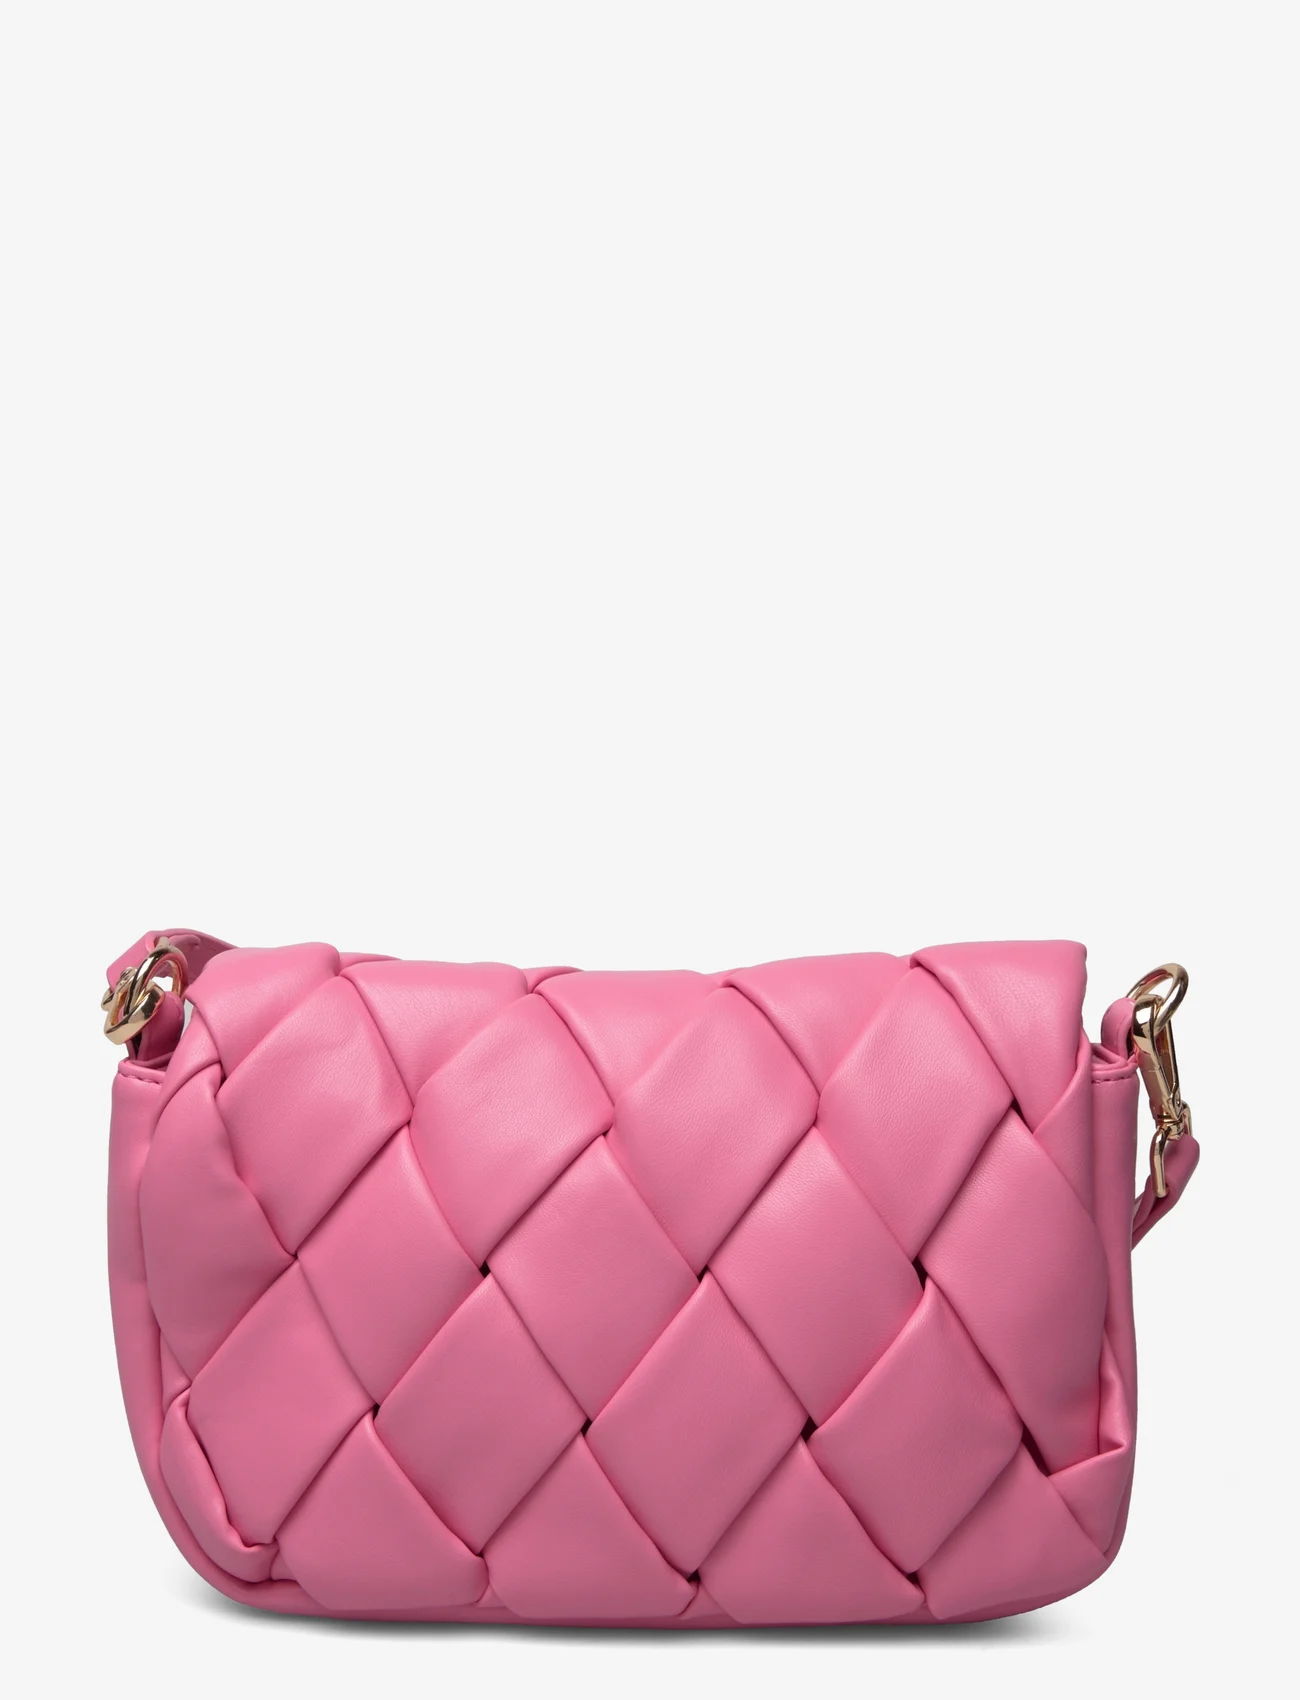 Noella - Brick Compartment Bag - birthday gifts - bubble pink - 1